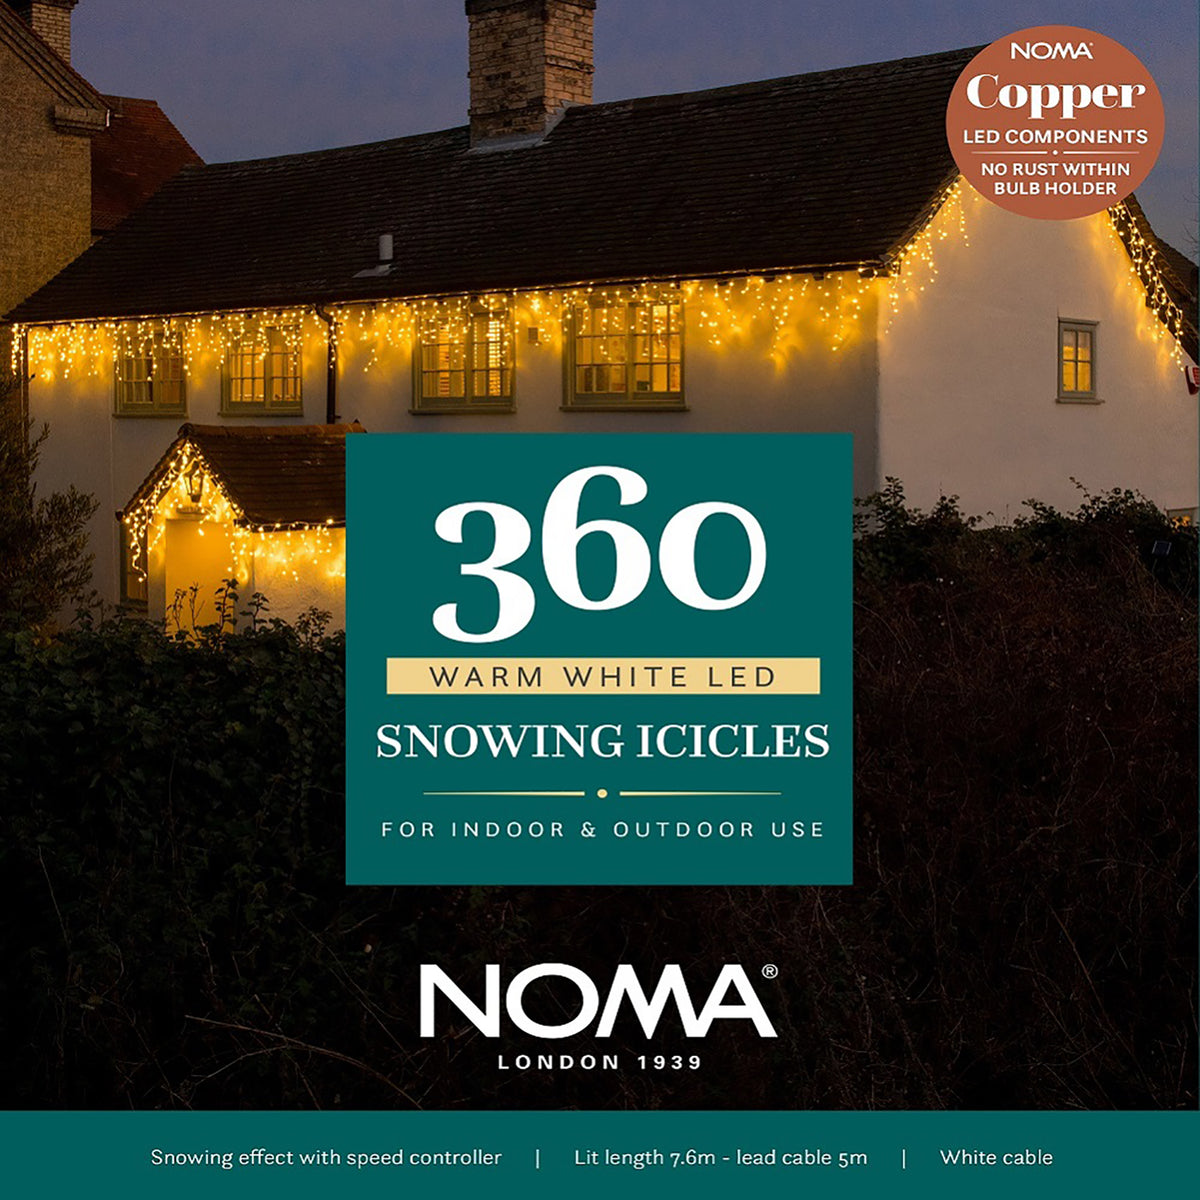 Noma Christmas 144, 240, 360, 480, 720, 960 Snowing Icicle LED Lights with White Cable - Warm White